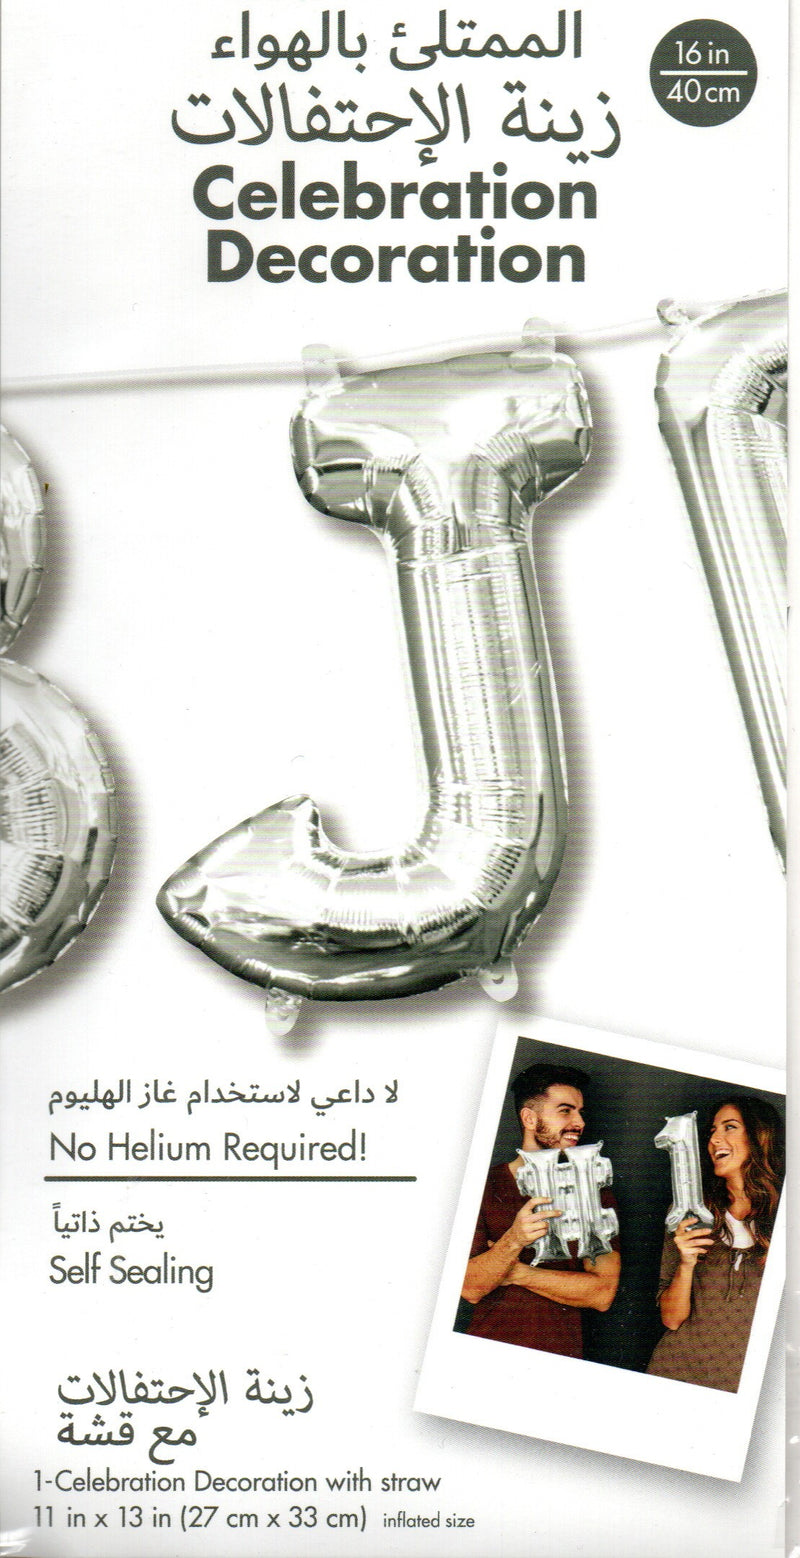 16inch Letter J Silver -  NON FLYING Air-Filled Only